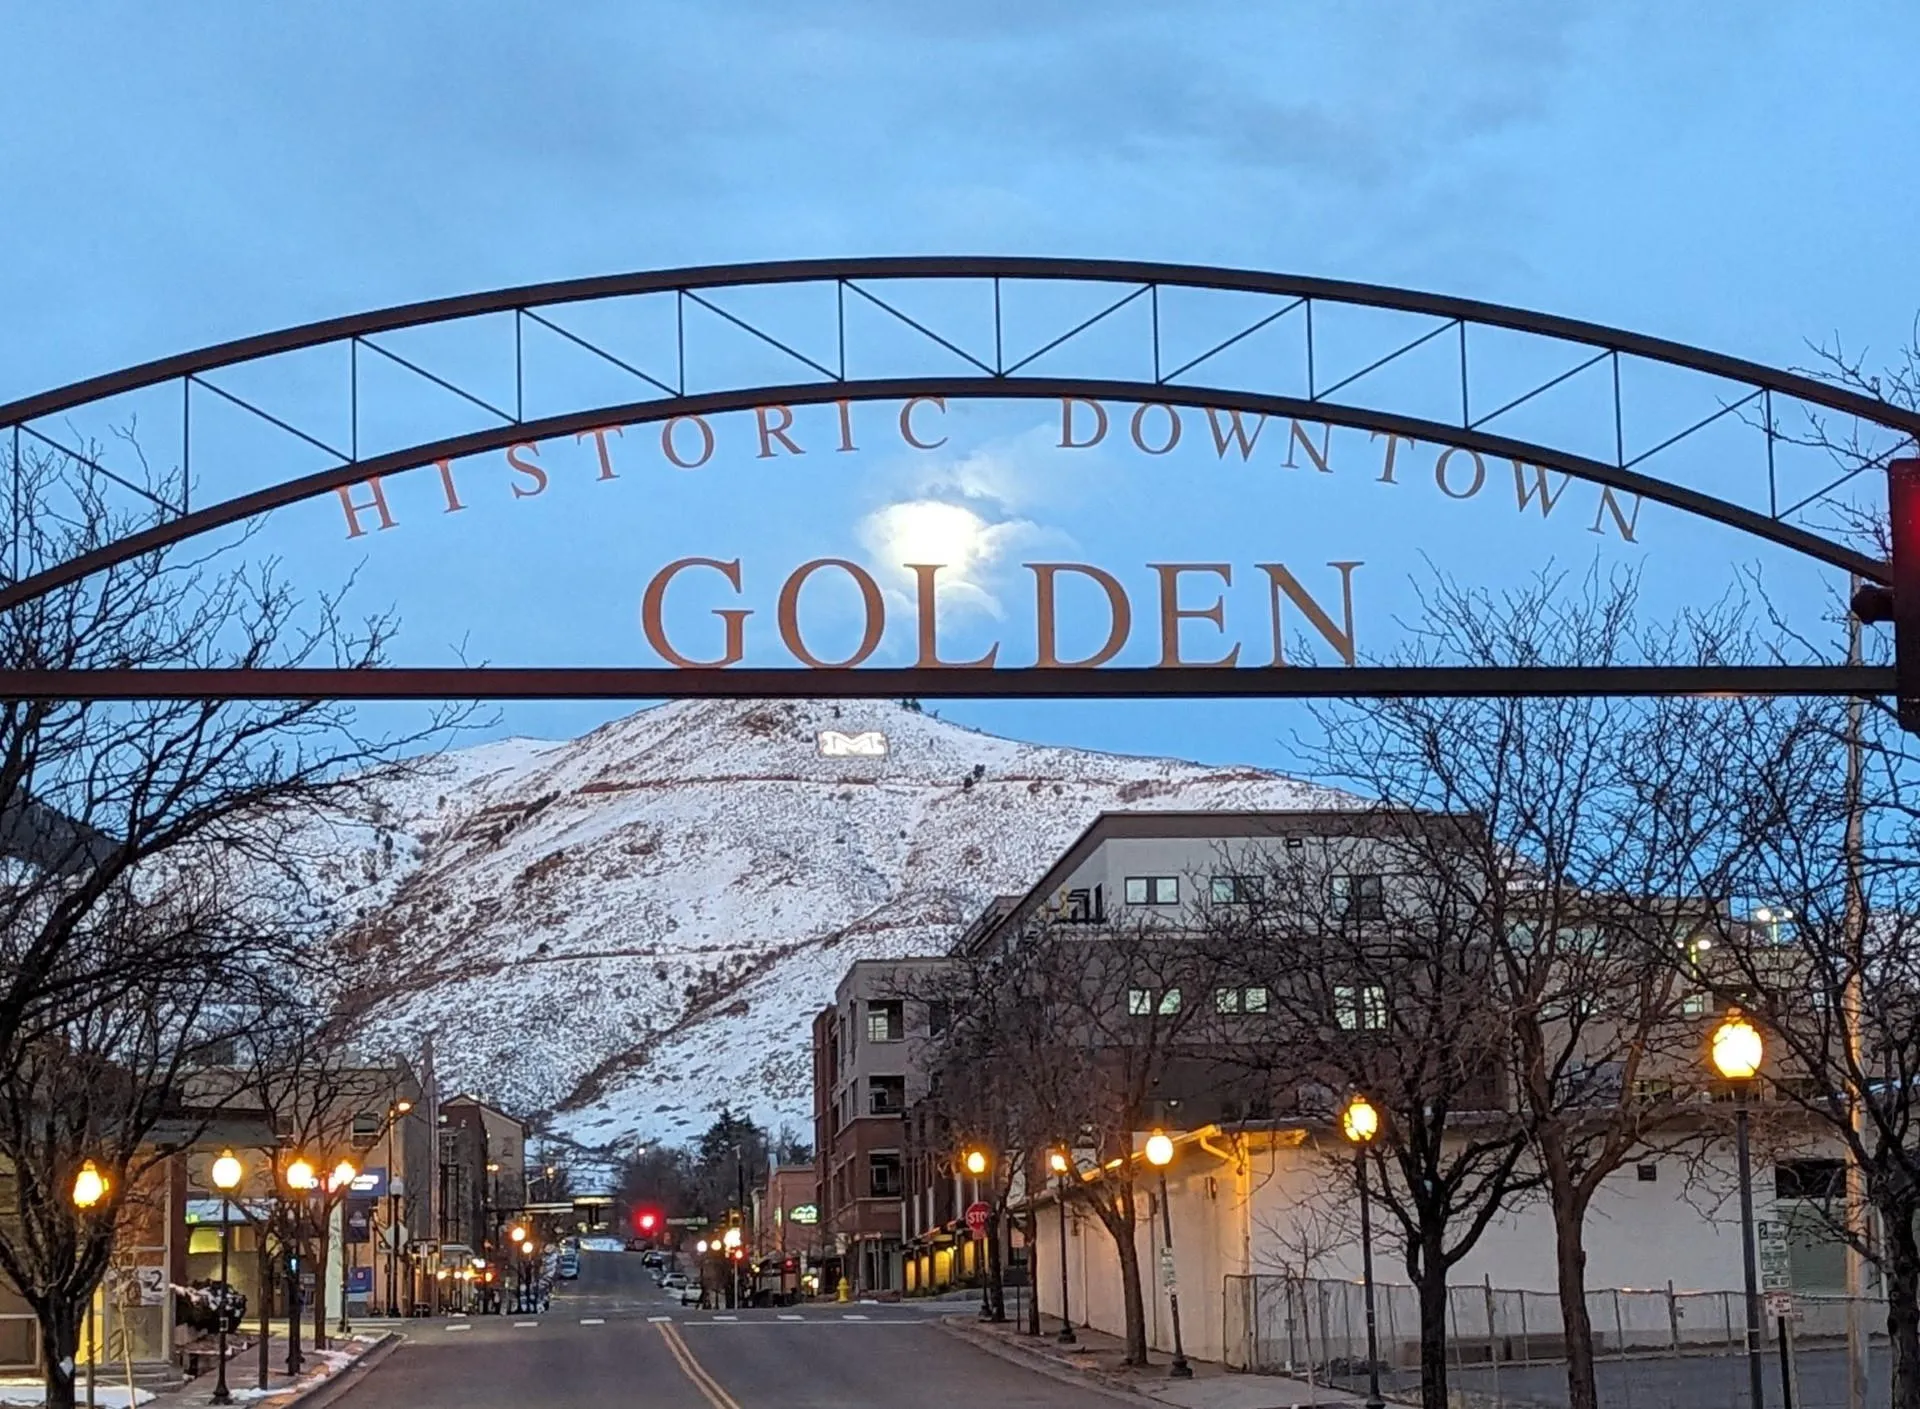 iron archway over 13th street says "Historic Downtown Golden."  Snow-covered Mt. Zion and a setting moon in background.